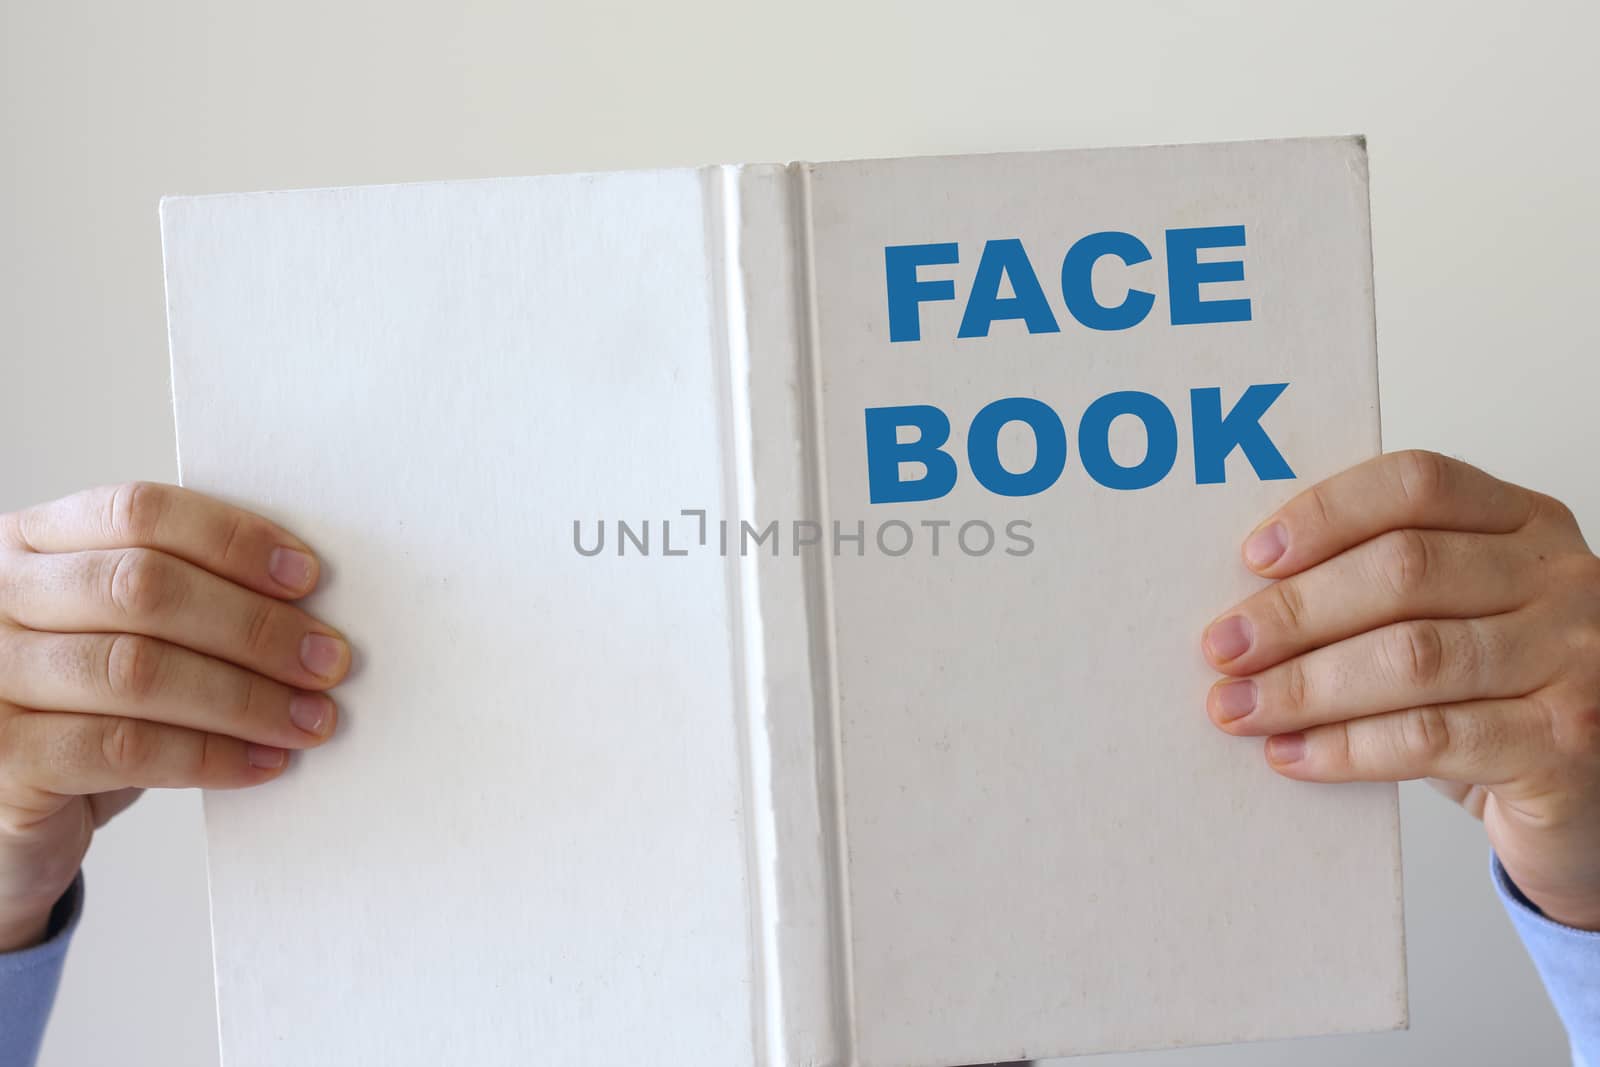 Man reading a book entitled Face Book holding it up in his hands so that his face is hidden behind the cover